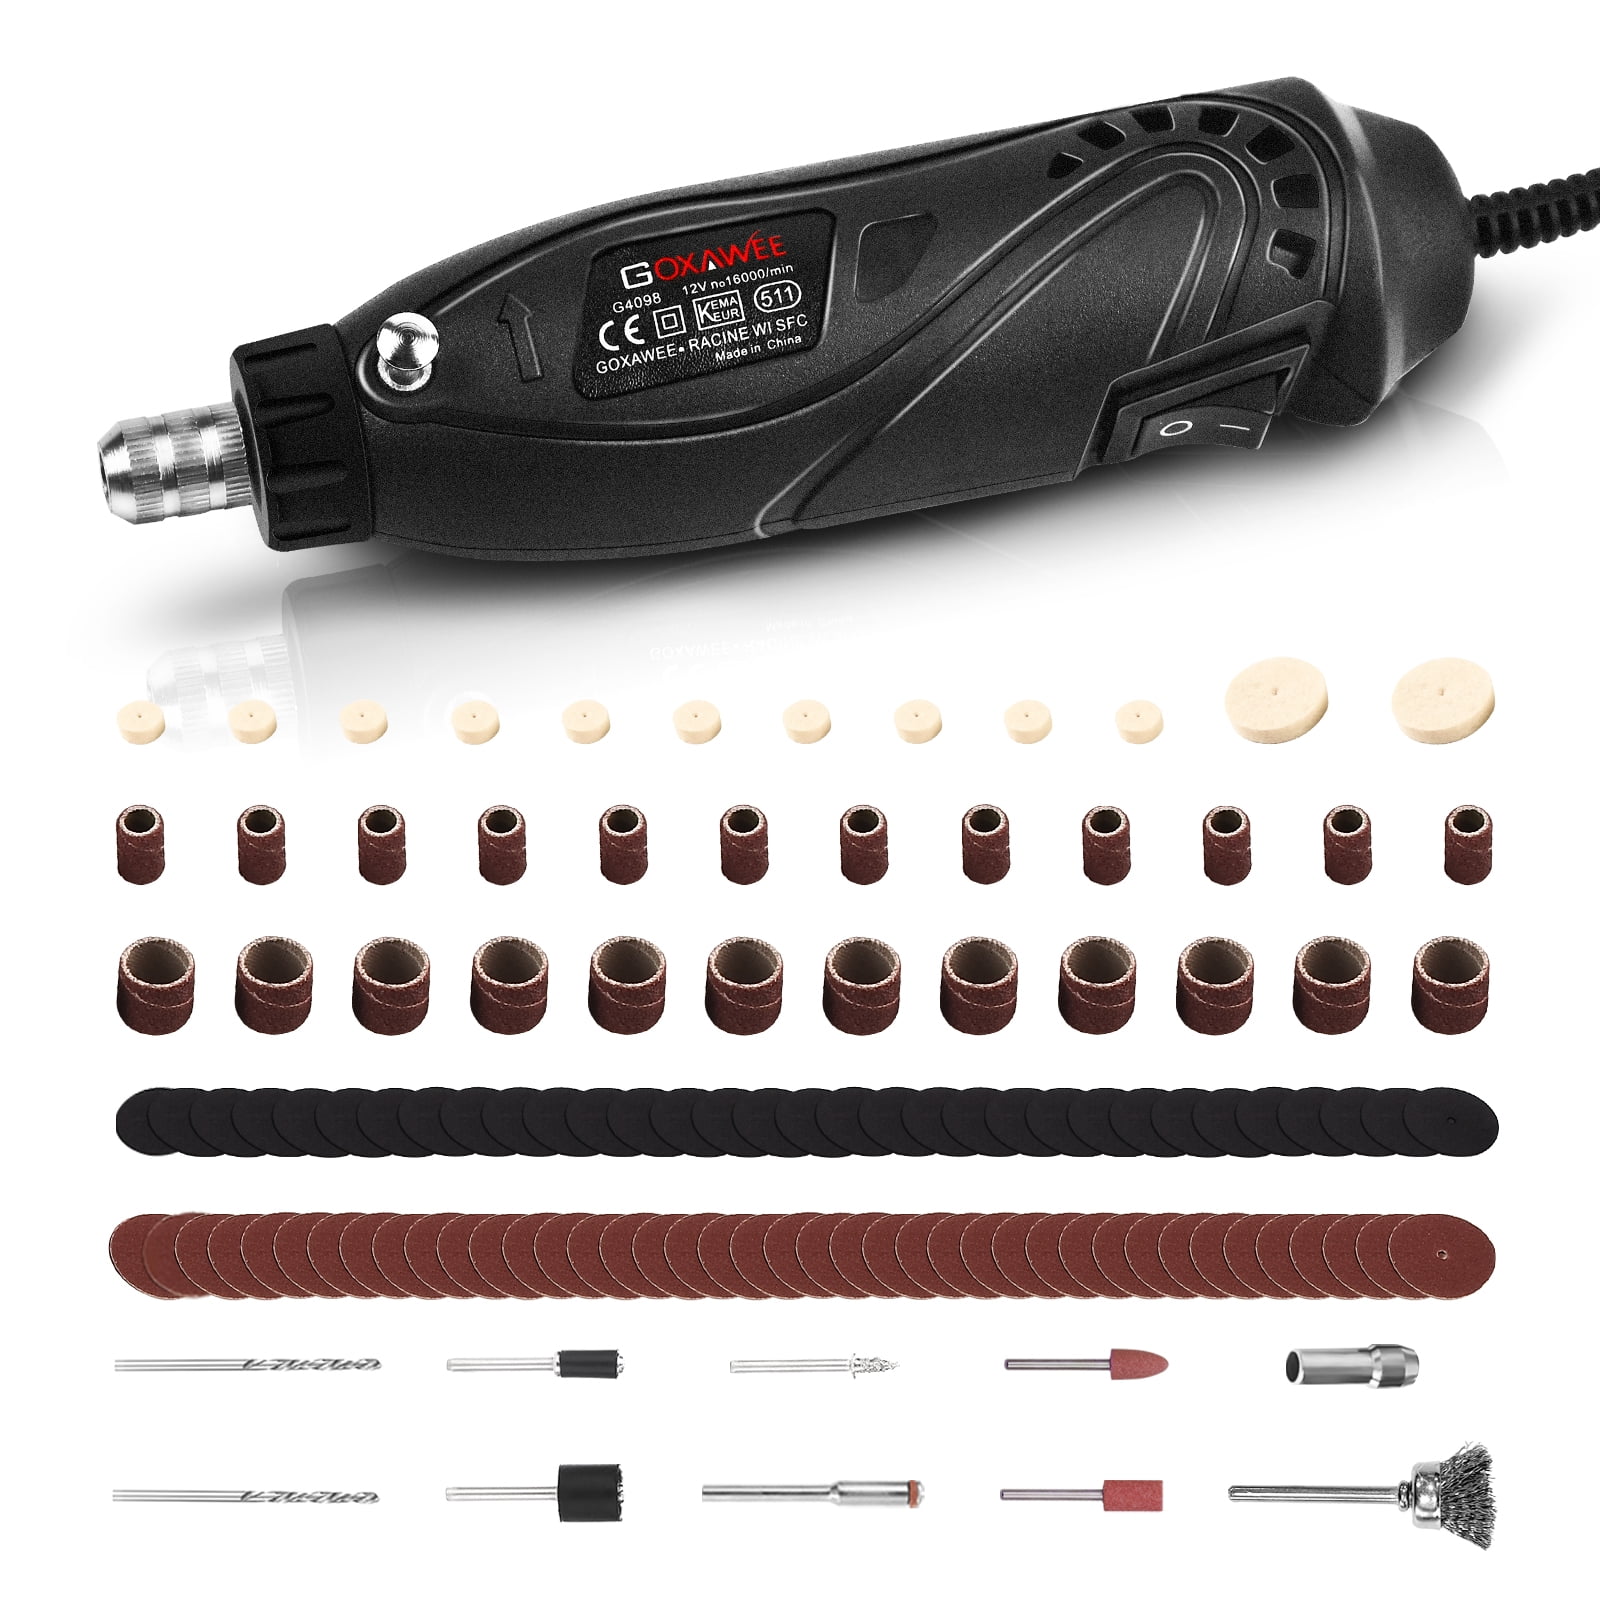 Accessories FREE SHIPPING Dremel 3000 Series 130W MultiPro Rotary Tool Kit 